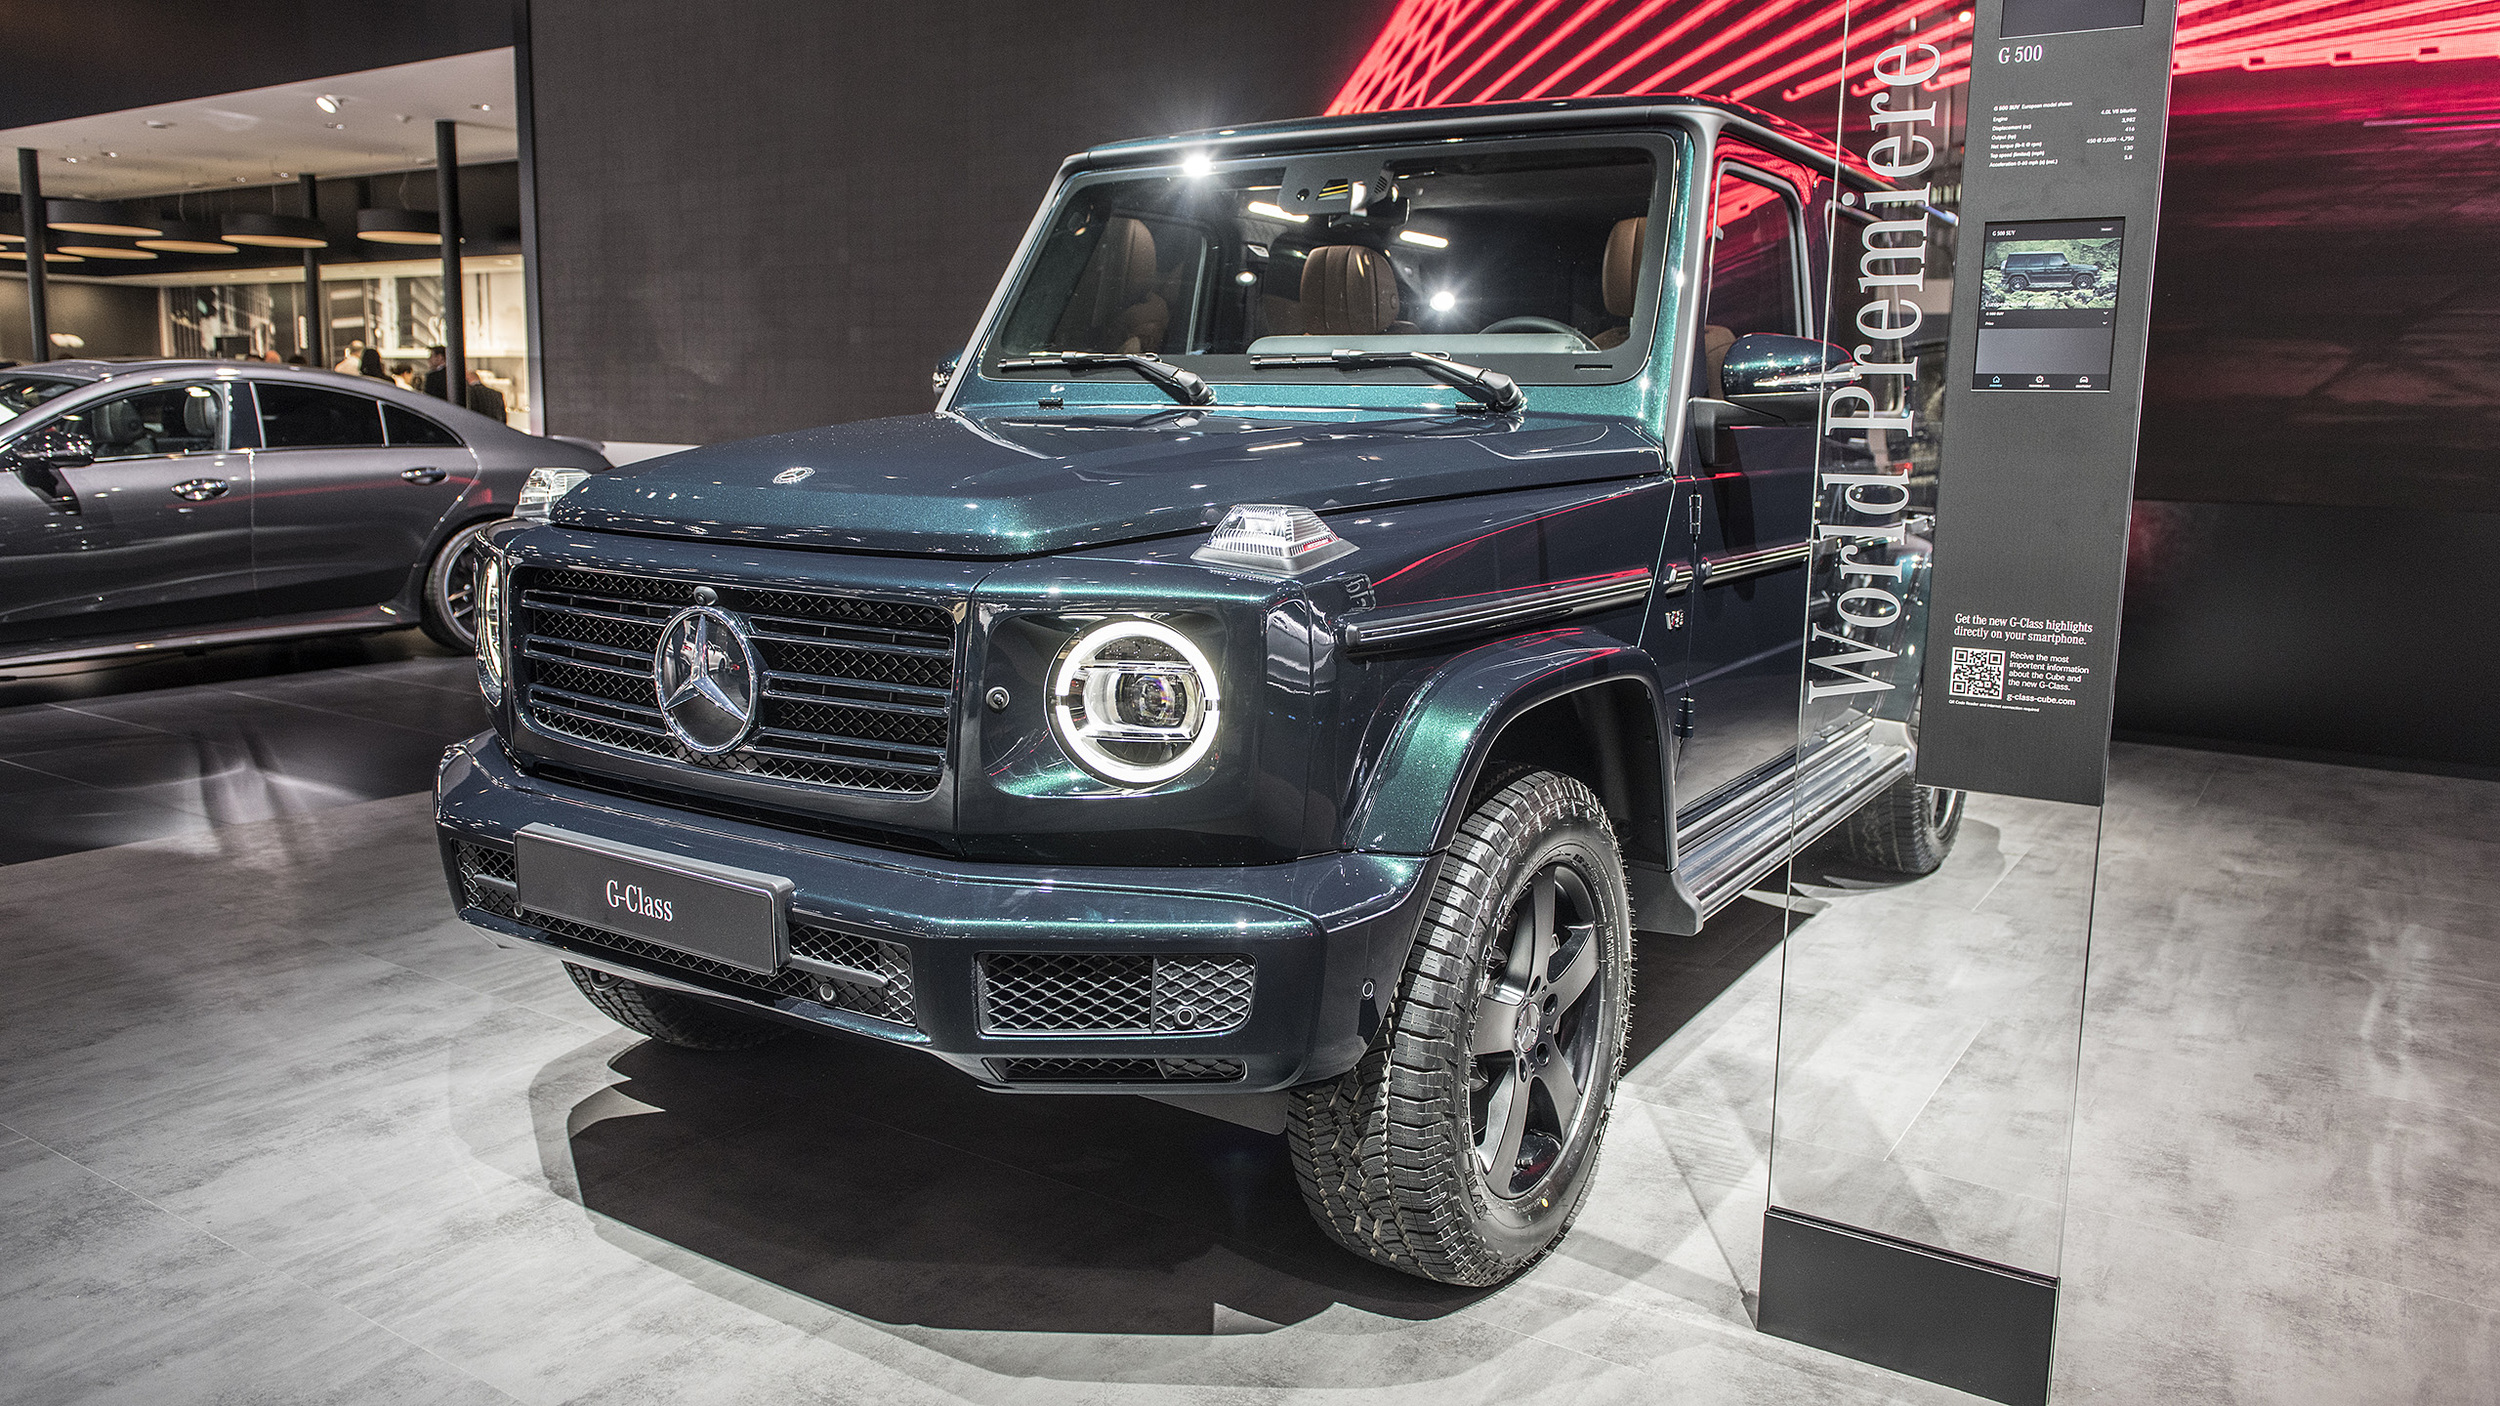 Mercedes-Benz considers withdrawing from NAIAS, the Detroit Auto Show ...